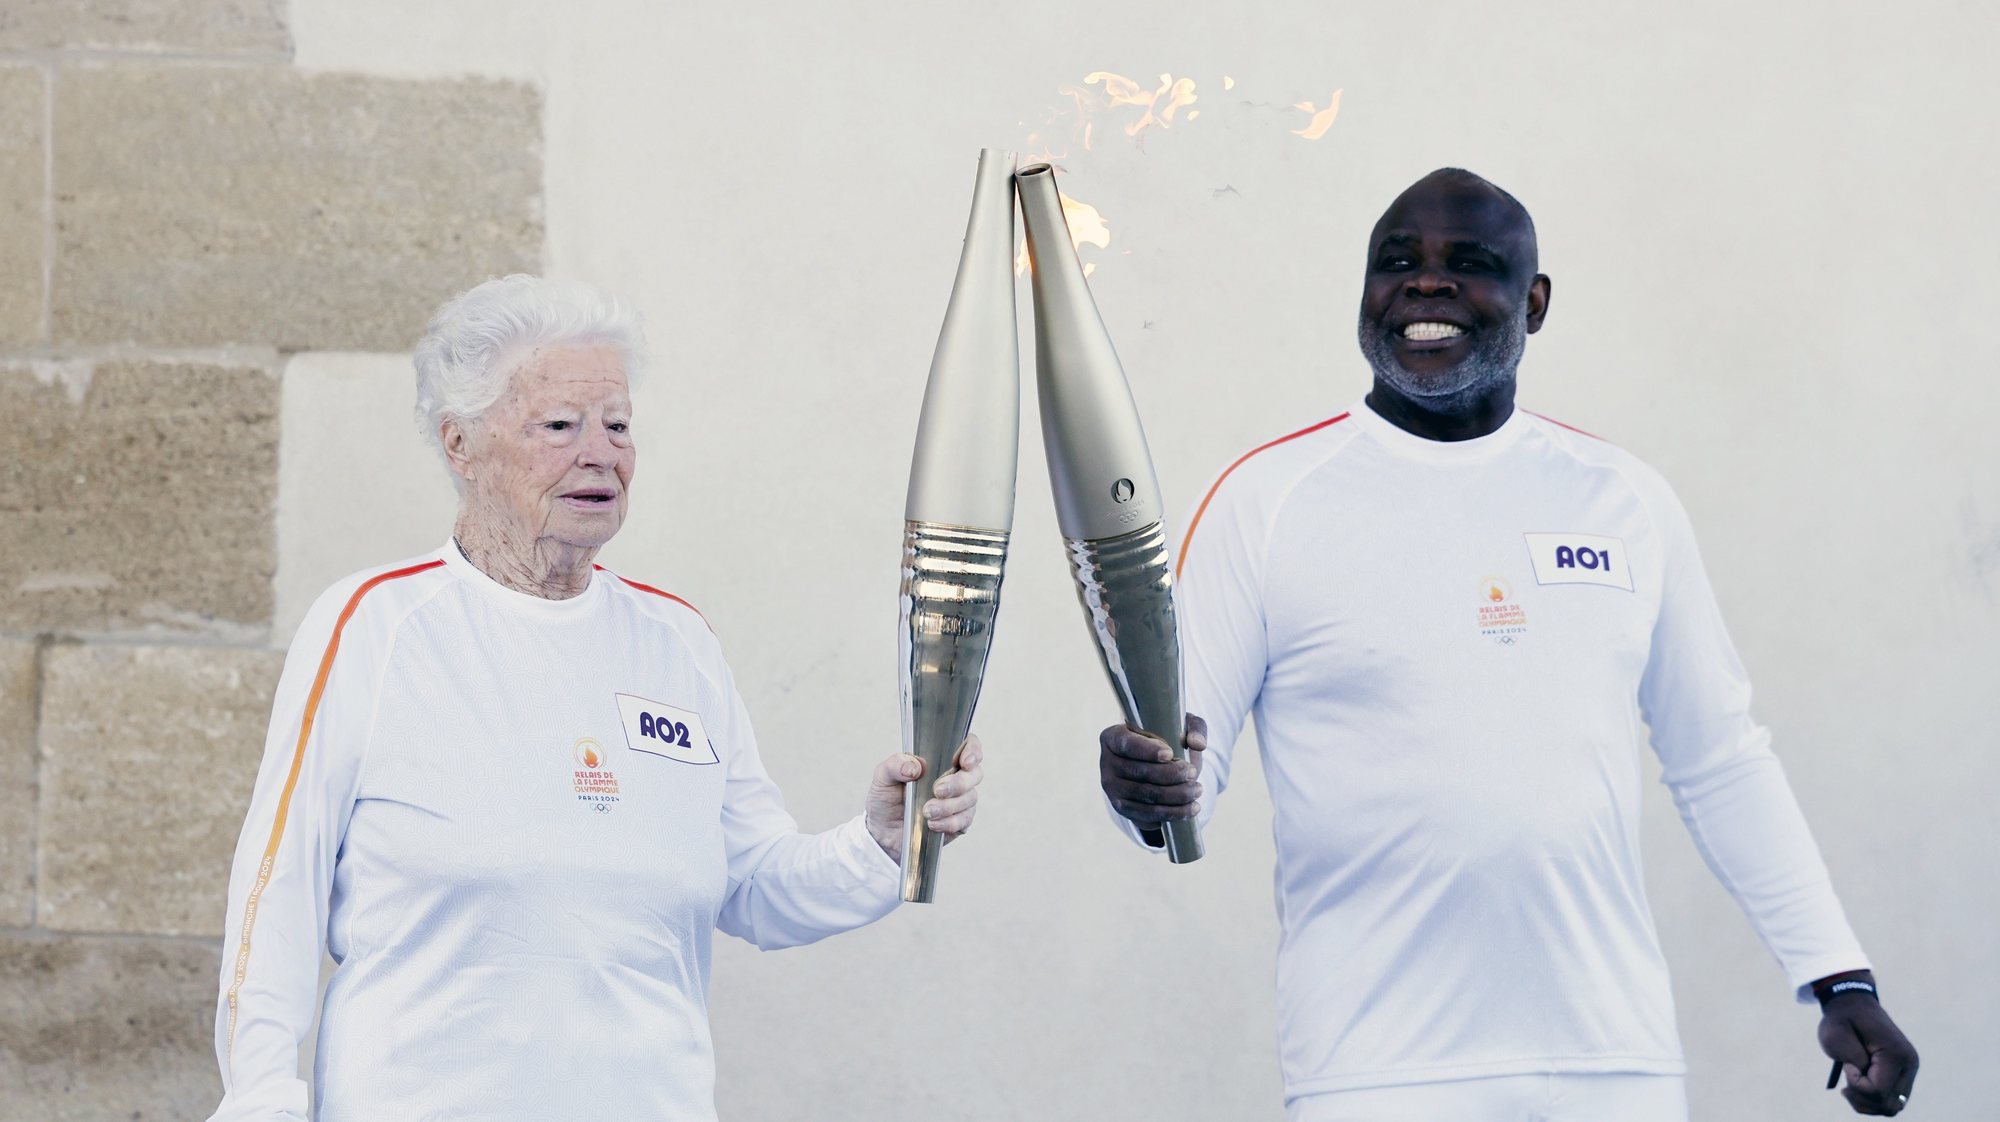 epa11328360 Former football player Basile Boli (R) gives the flame to Olympic Marseille&#039;s supporter Colette Cataldo during the first leg of Olympic Torch relay in Marseille, France, 09 May 2024. The Olympic Flame arrived in Marseille on 08 May following a 12-day journey from Piraeus, Greece, on board the Belem, a three-masted sailing ship built in 1896 and currently serving as a training ship under the French flag. The Paris 2024 Olympic Games will start on 26 July 2024.  EPA/GUILLAUME HORCAJUELO